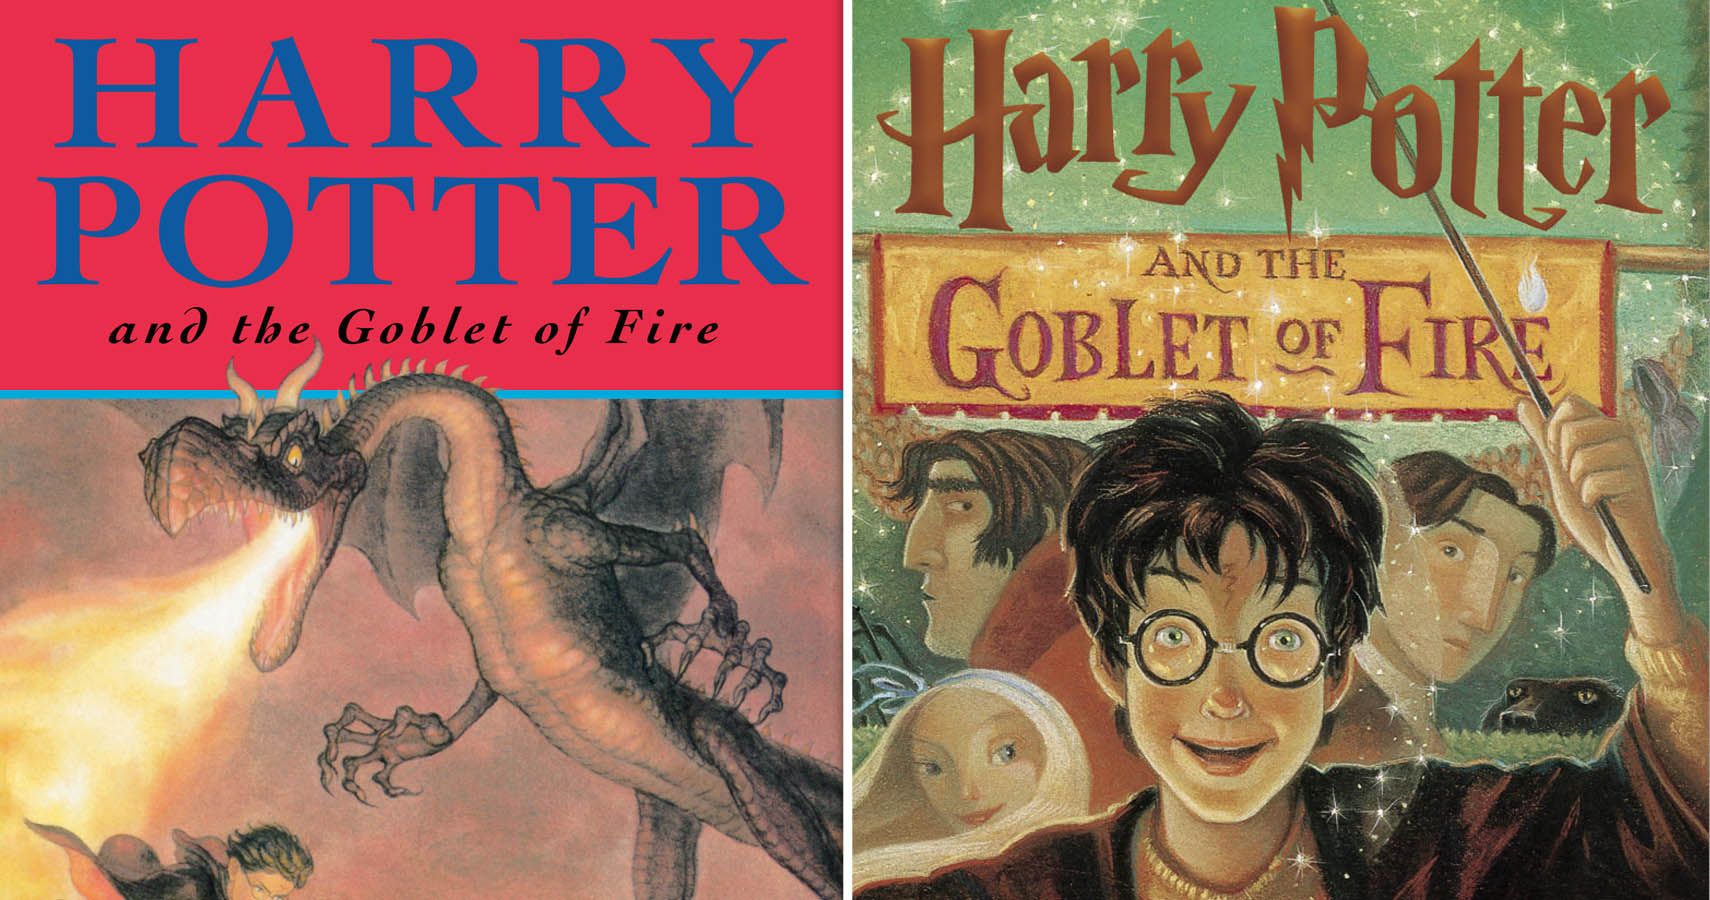 Harry Potter And The Goblet Of Fire 10 Mistakes JK Rowling Made In The Book